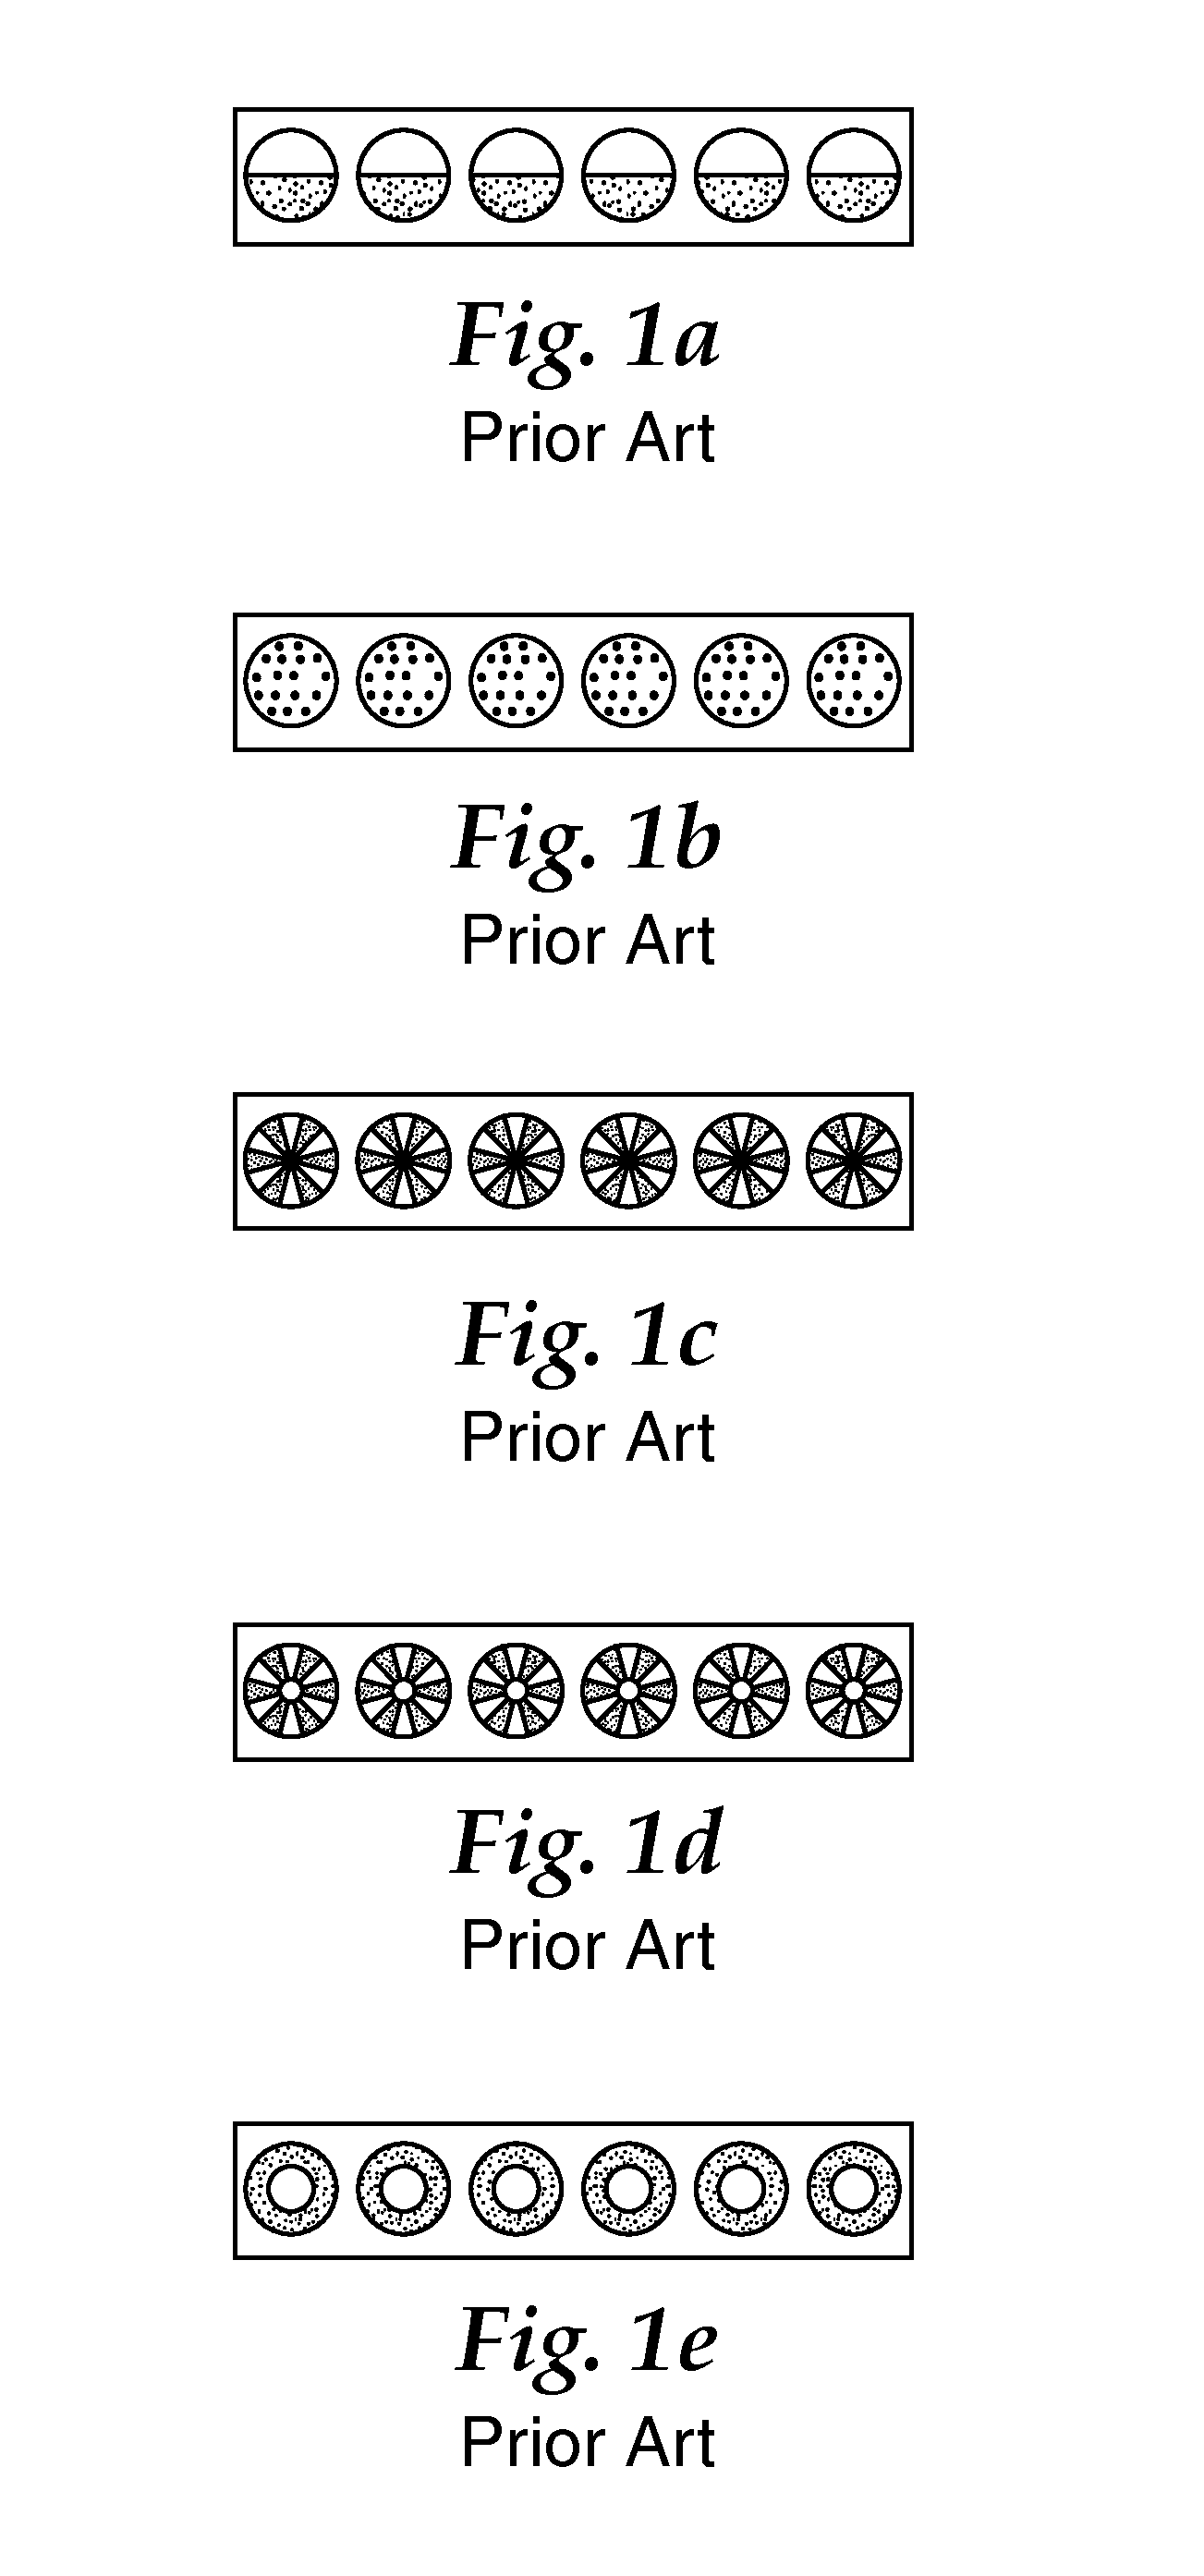 Monocomponent monolayer meltblown web and meltblowing apparatus